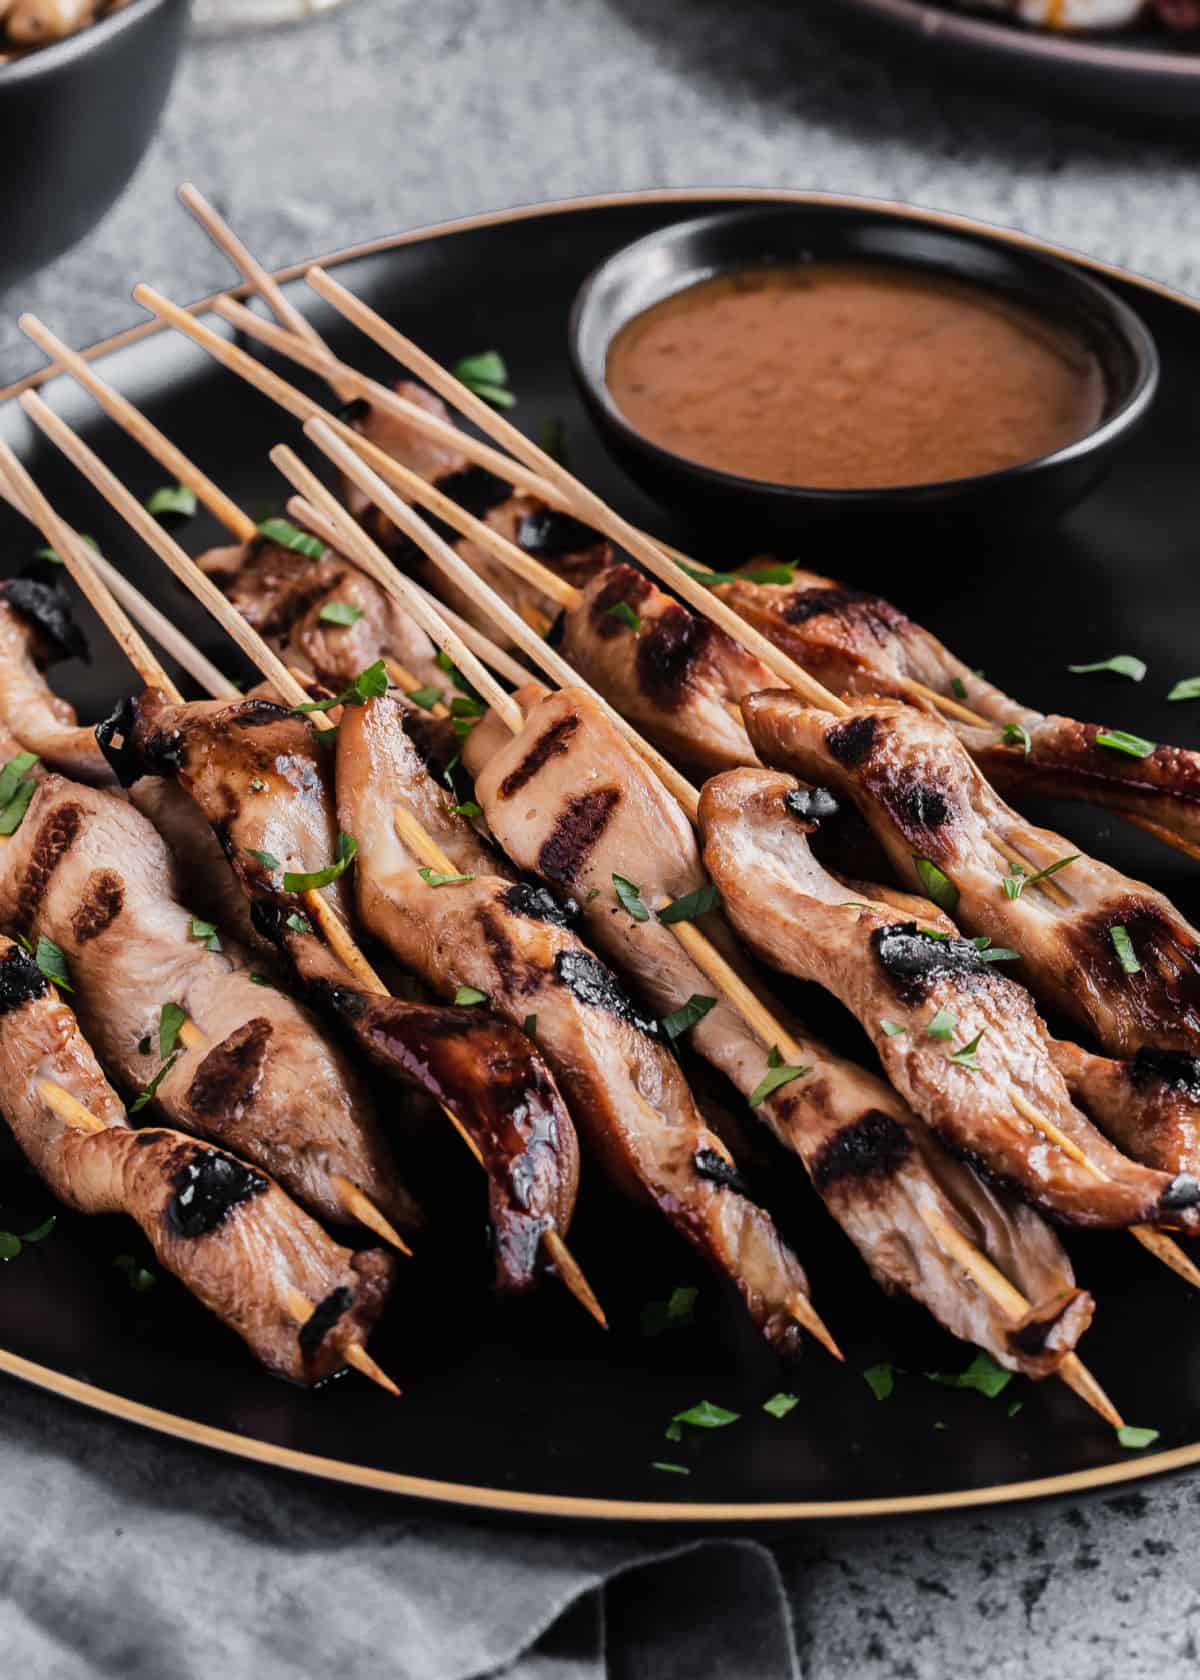 chicken on skewers with dipping sauce on black plate.